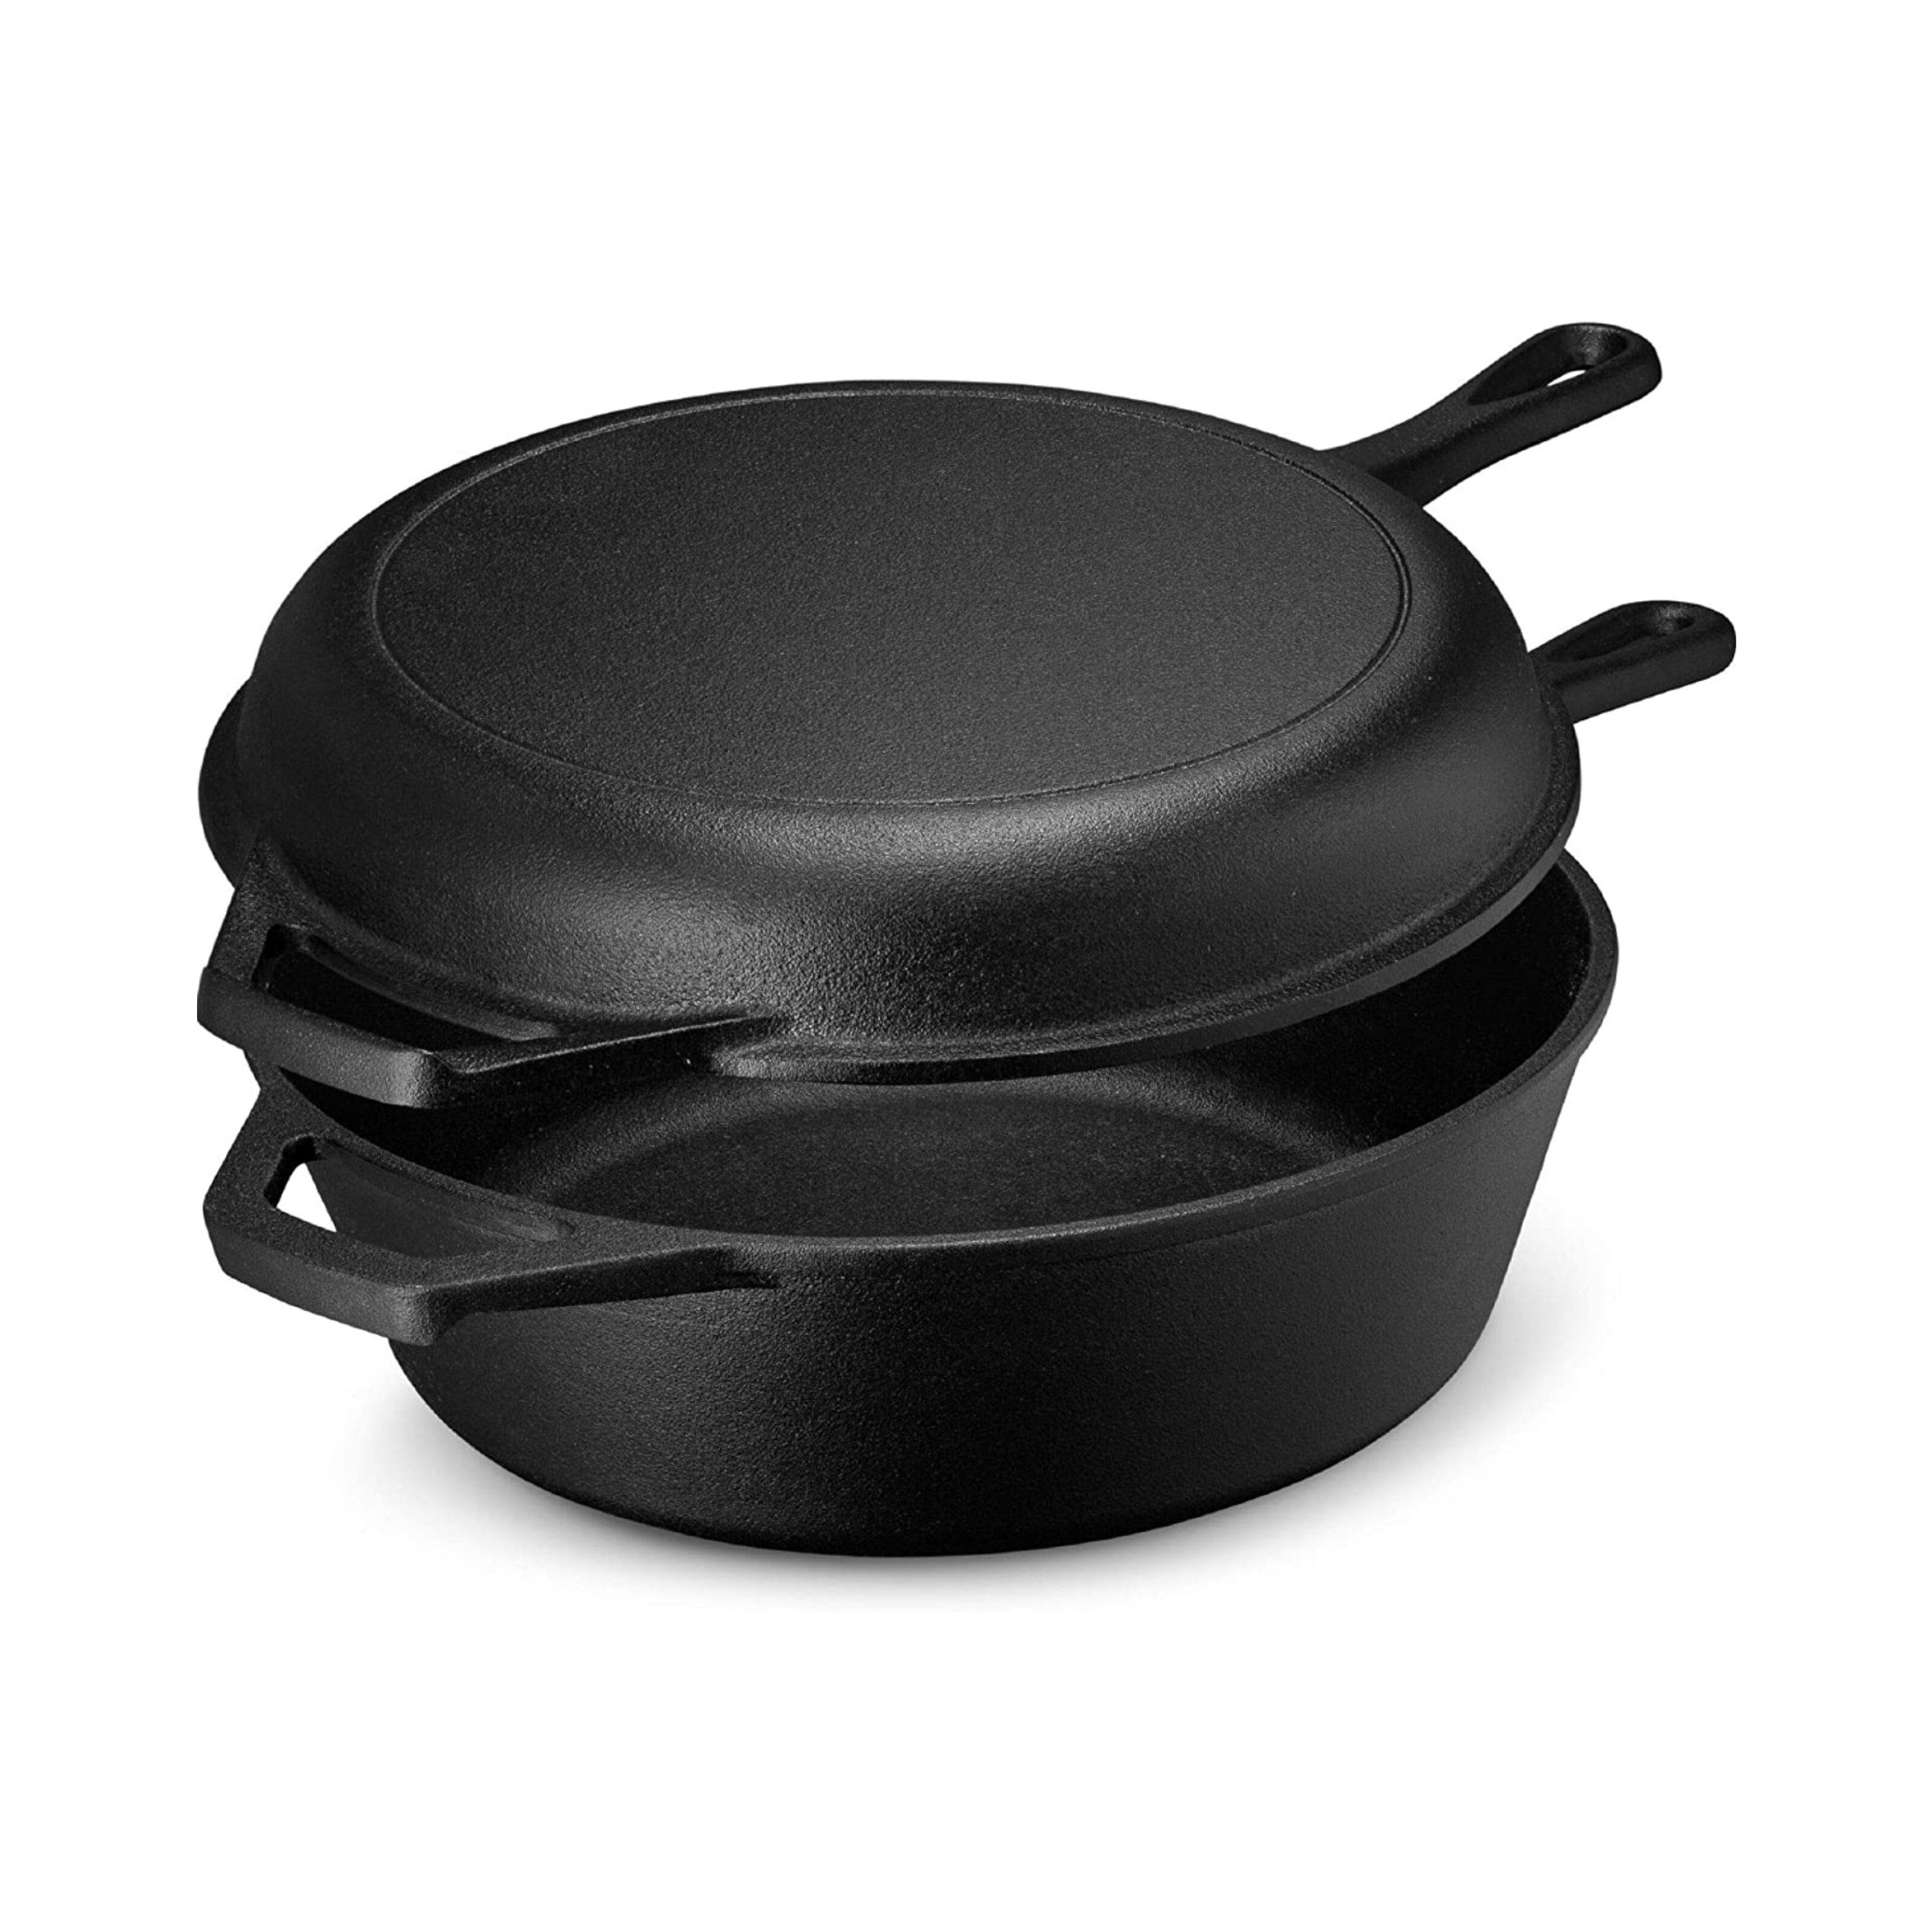 Camping Dutch Oven,9 Qt Pre-Seasoned Camping Cookware Pot With Lid - Lid  Lifter,Cast Iron Deep Pot with Metal Handle for Camping Cooking BBQ Baking  Campfire Modern Black 